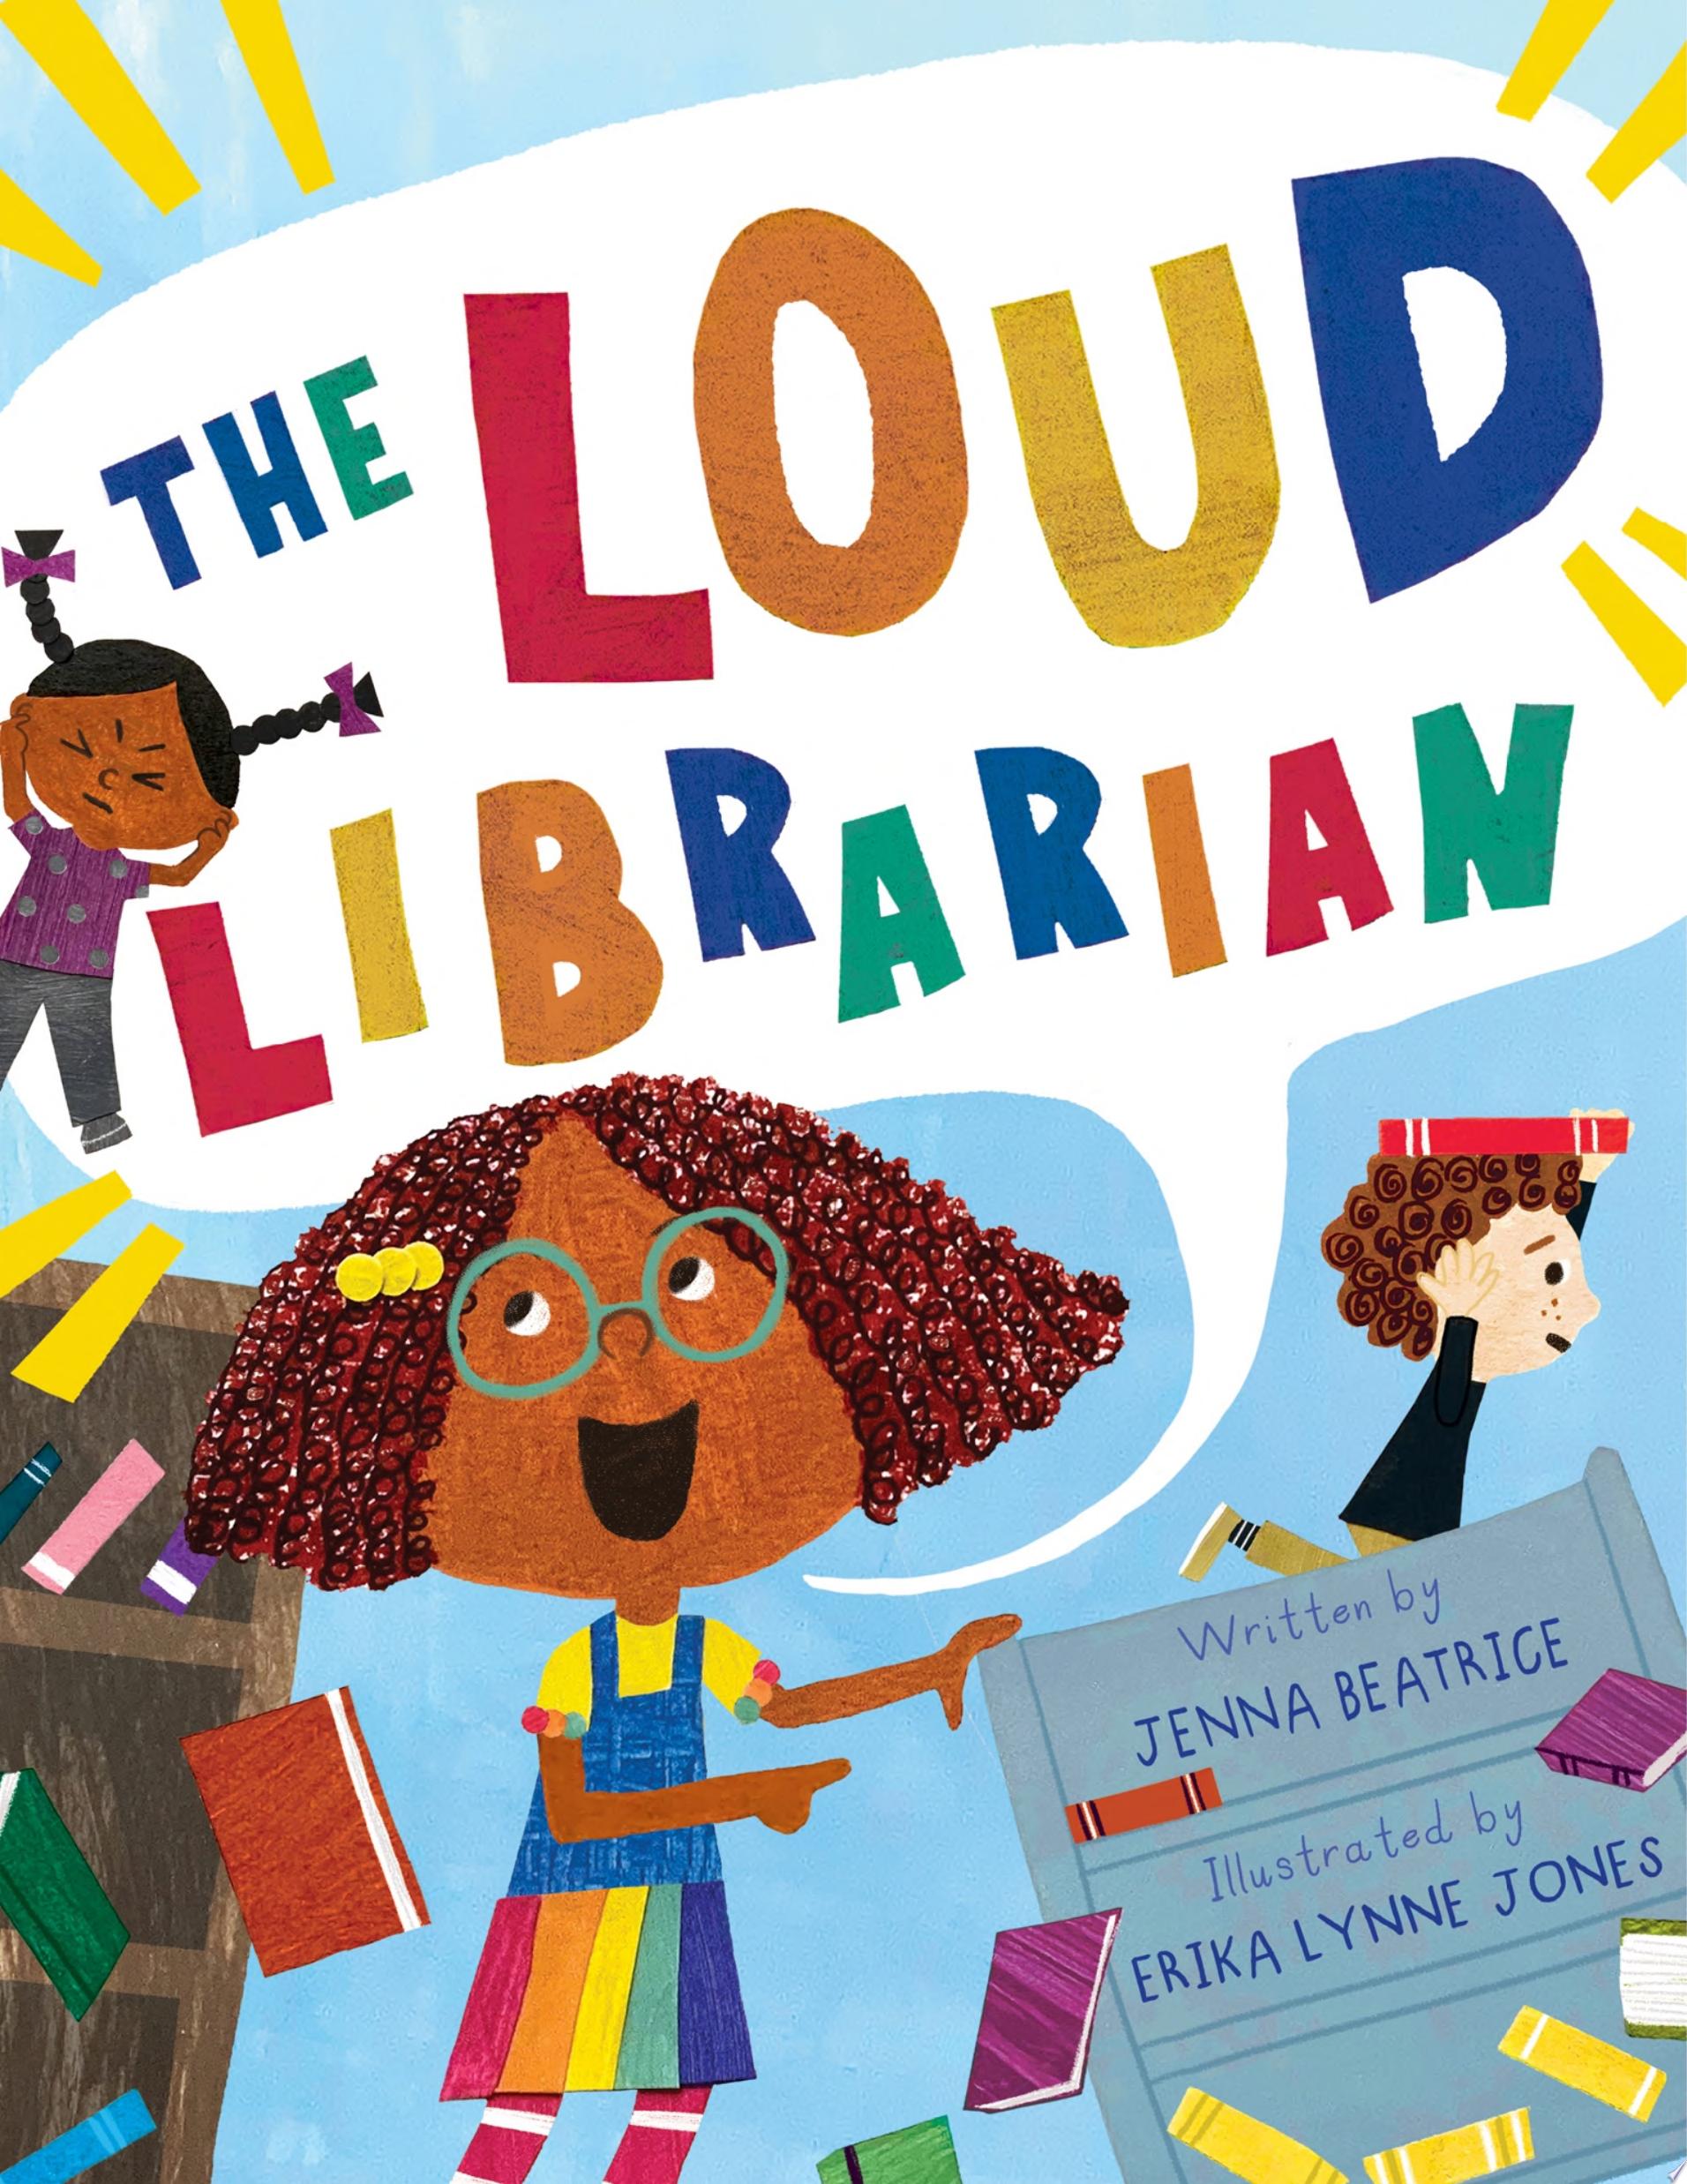 Image for "The Loud Librarian"